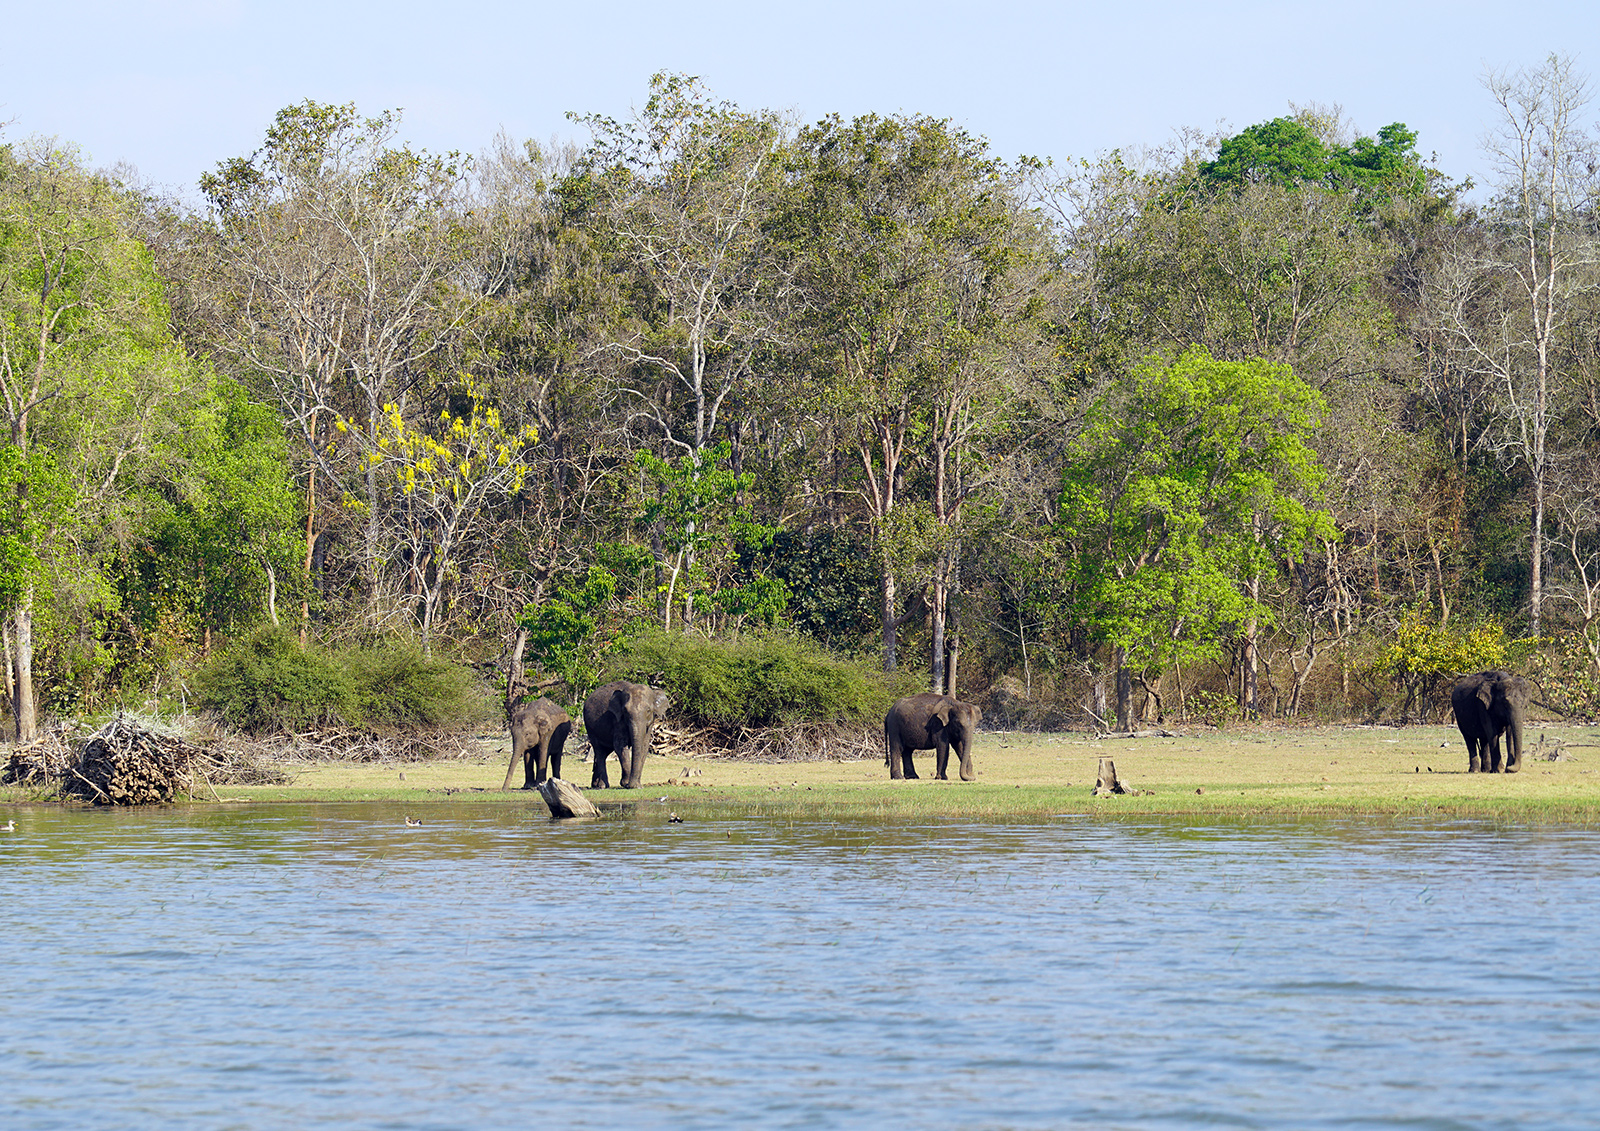 Boat safaris don't get you very close to the animals, but we saw elephants on the shore